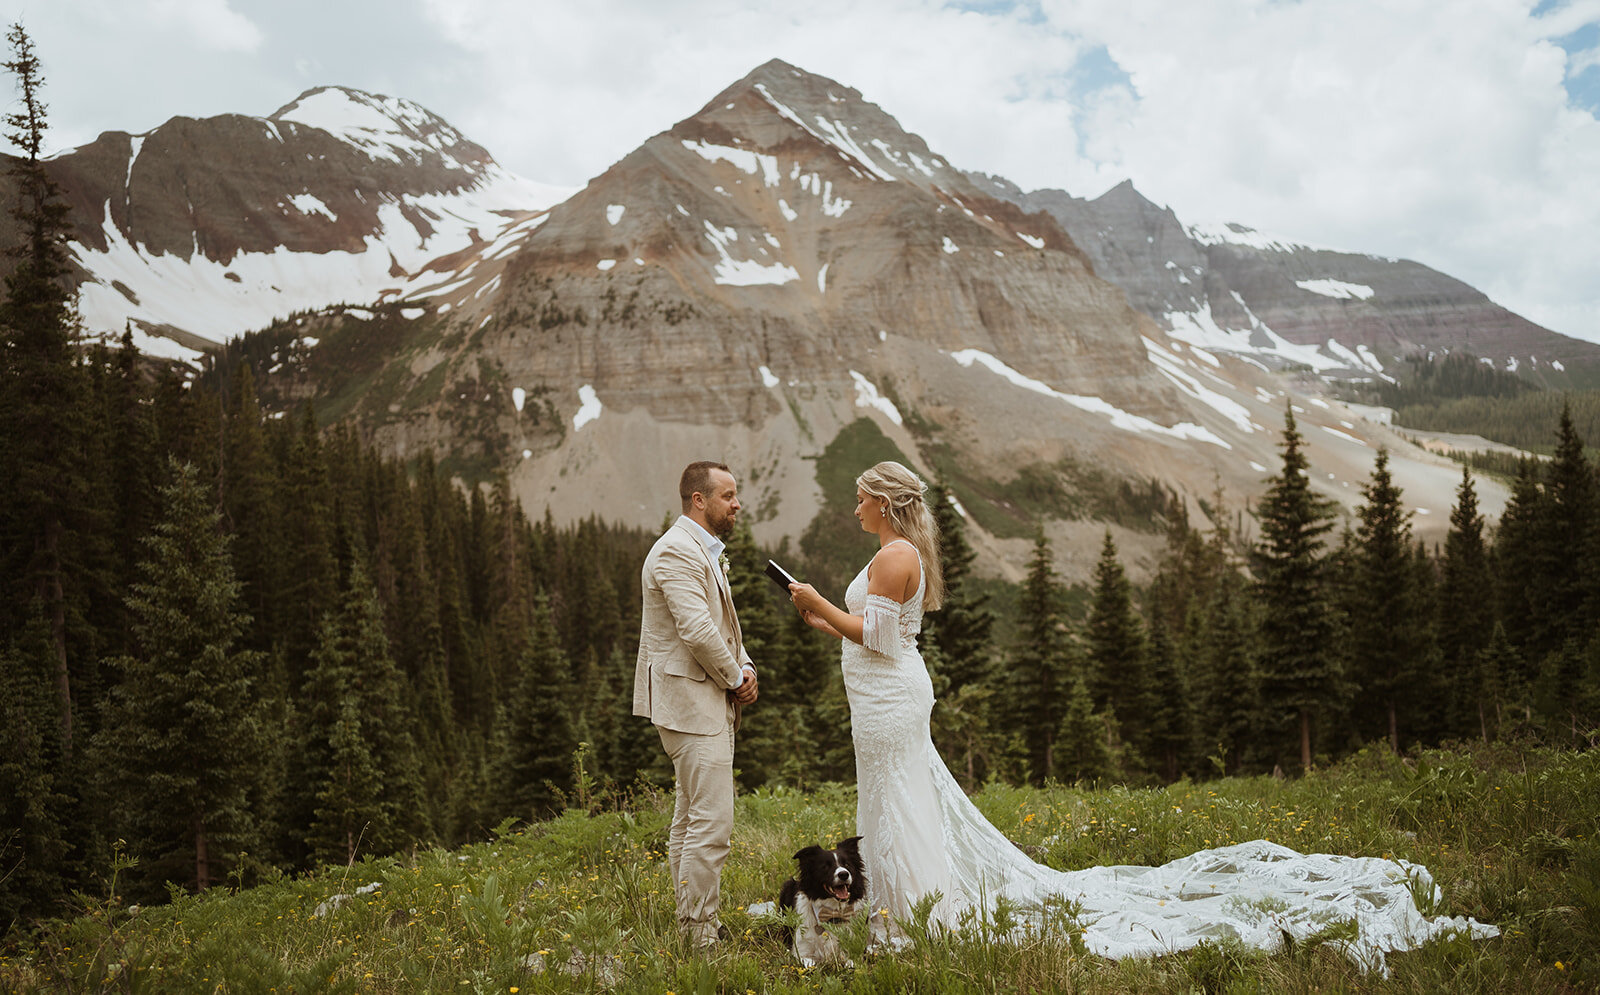 The couple is facing each other with their dog in between them as they read their vows in a valley. It is summertime and very warm. The bride is wearing a dress with patterned lace, and the groom is wearing a tan suit. They are wiping away tears as they finish their elopement. The couple decided to elope, and they hiked and off roaded on their elopement day. They included their dog in their elopement, which is a border Collie. The mountains are directly behind them and are framing them in this image. there is still snow on them, and there are wildflowers. If you want to find wildflowers on your  elopement, plan to elope in the early summer.